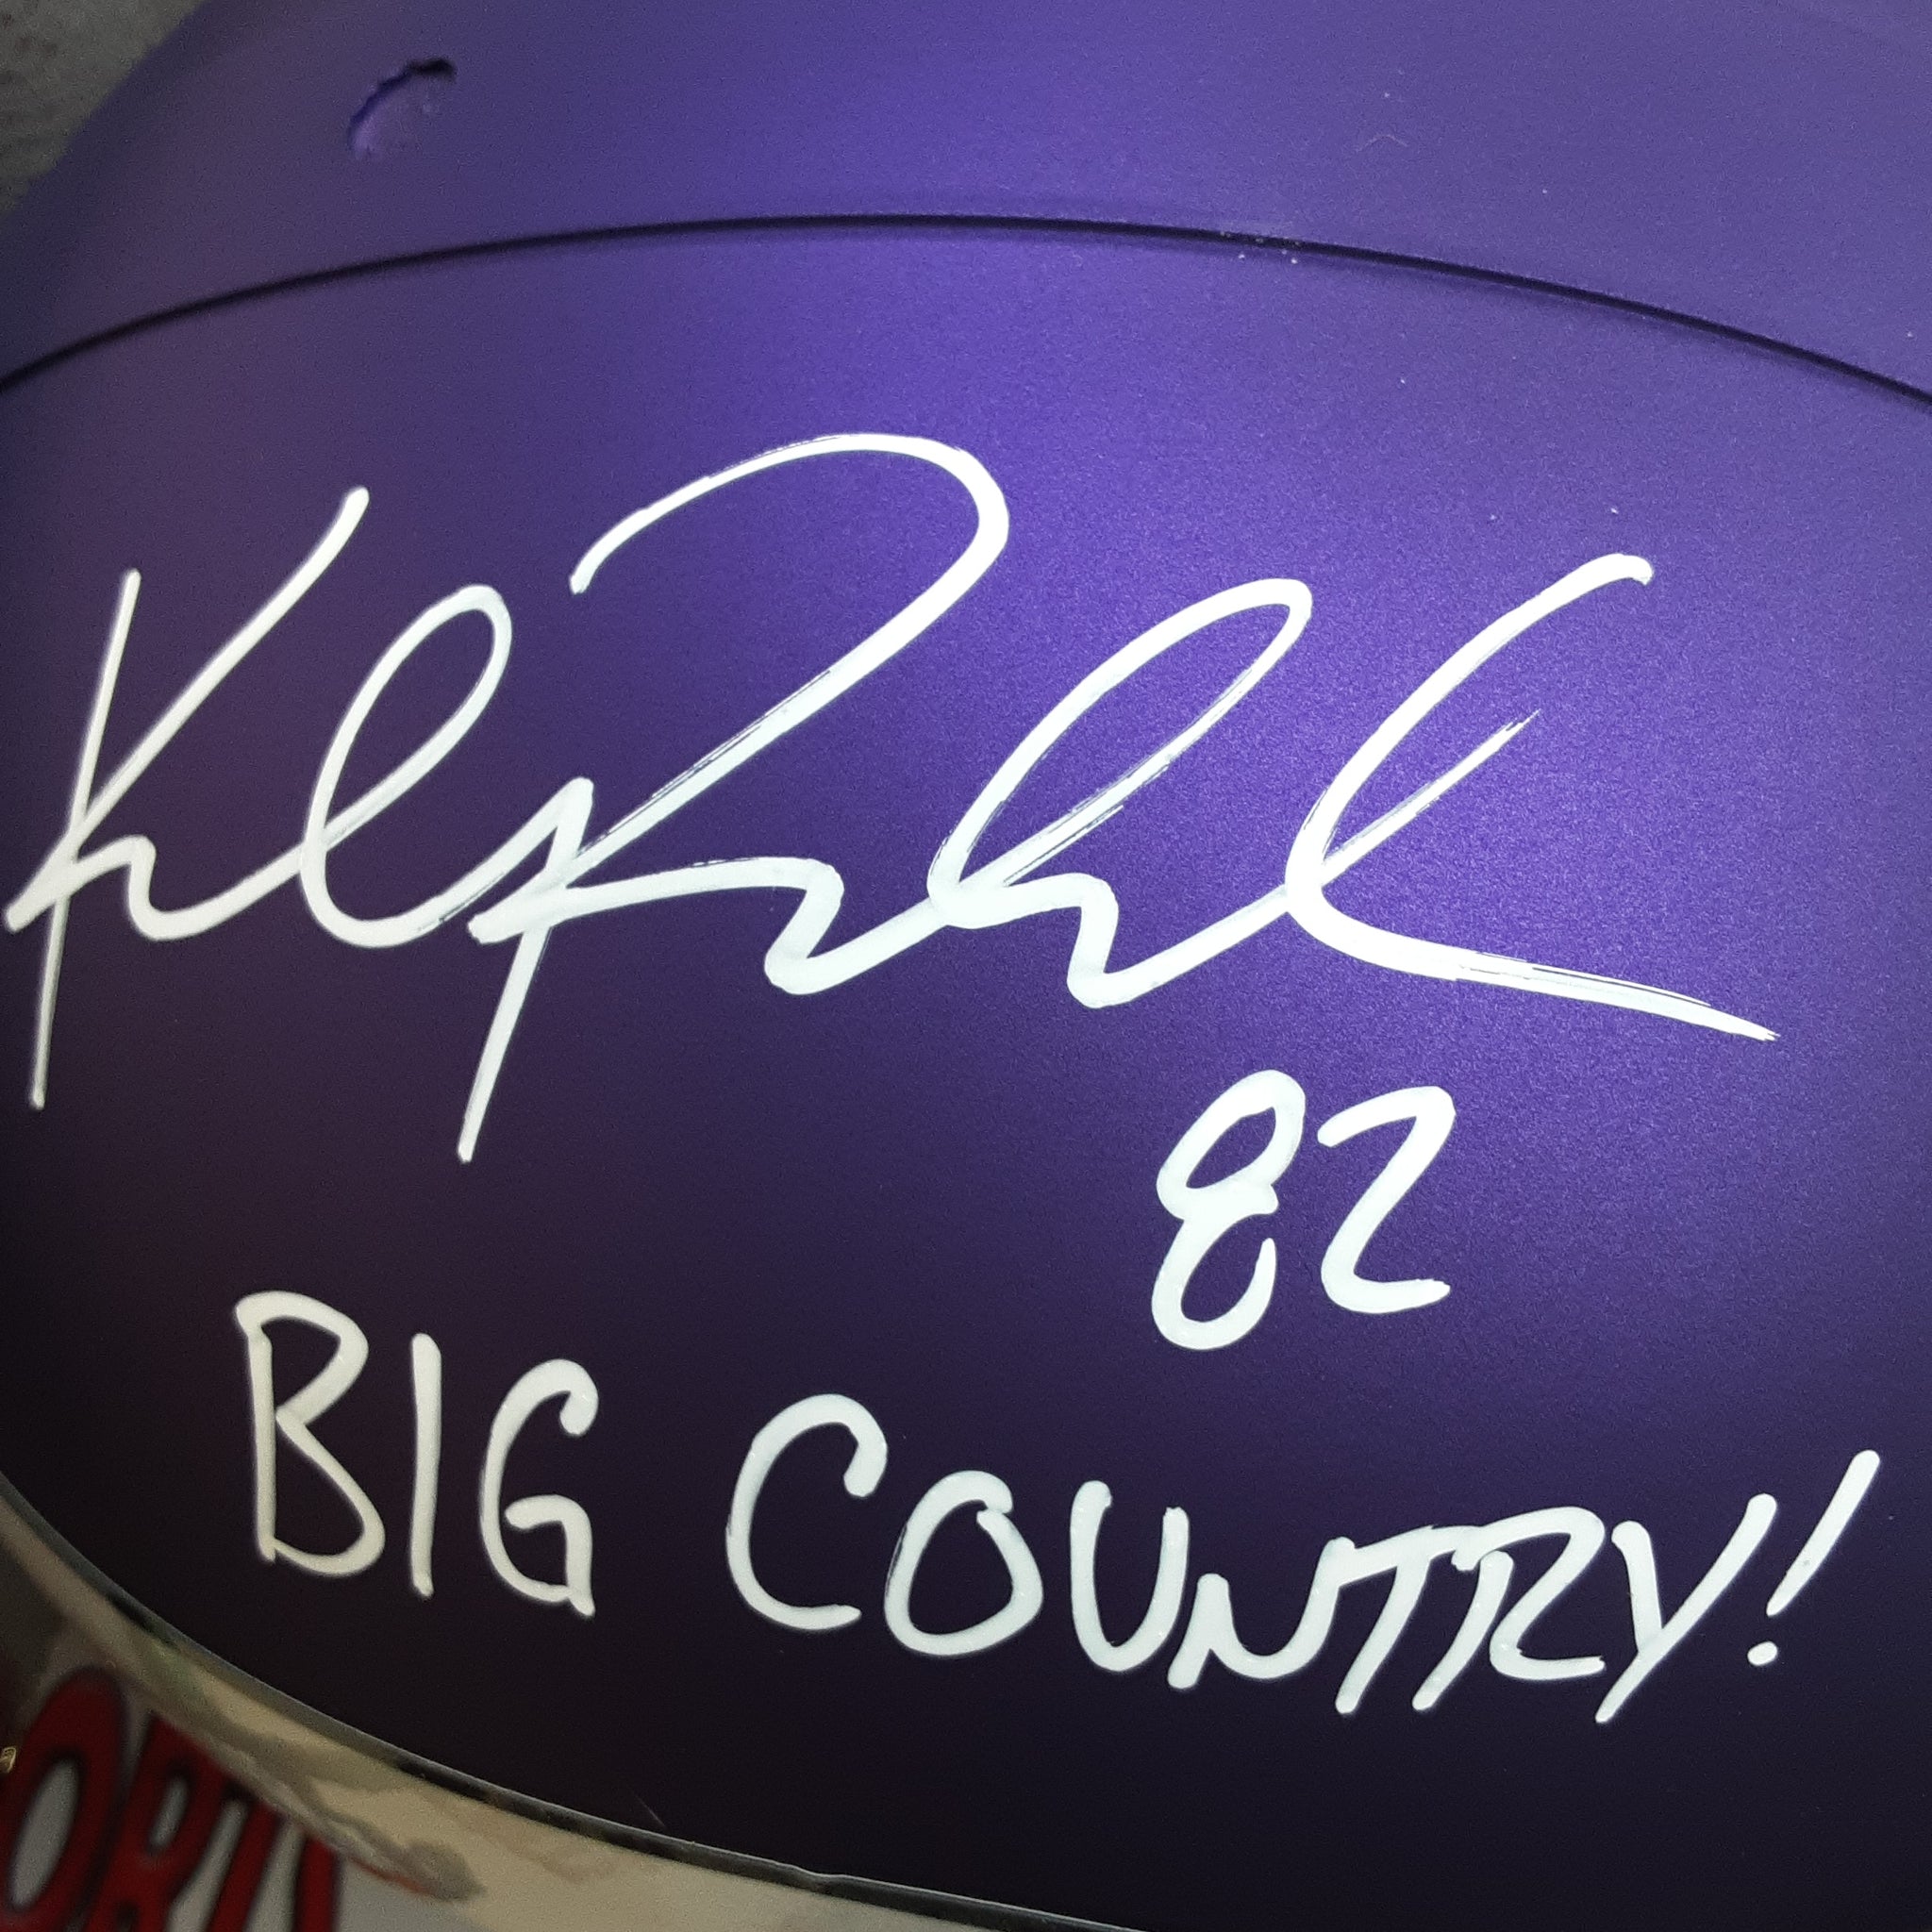 Kyle Rudolph Authentic Signed w/Inscription Autographed Full-size Replica Helmet Beckett